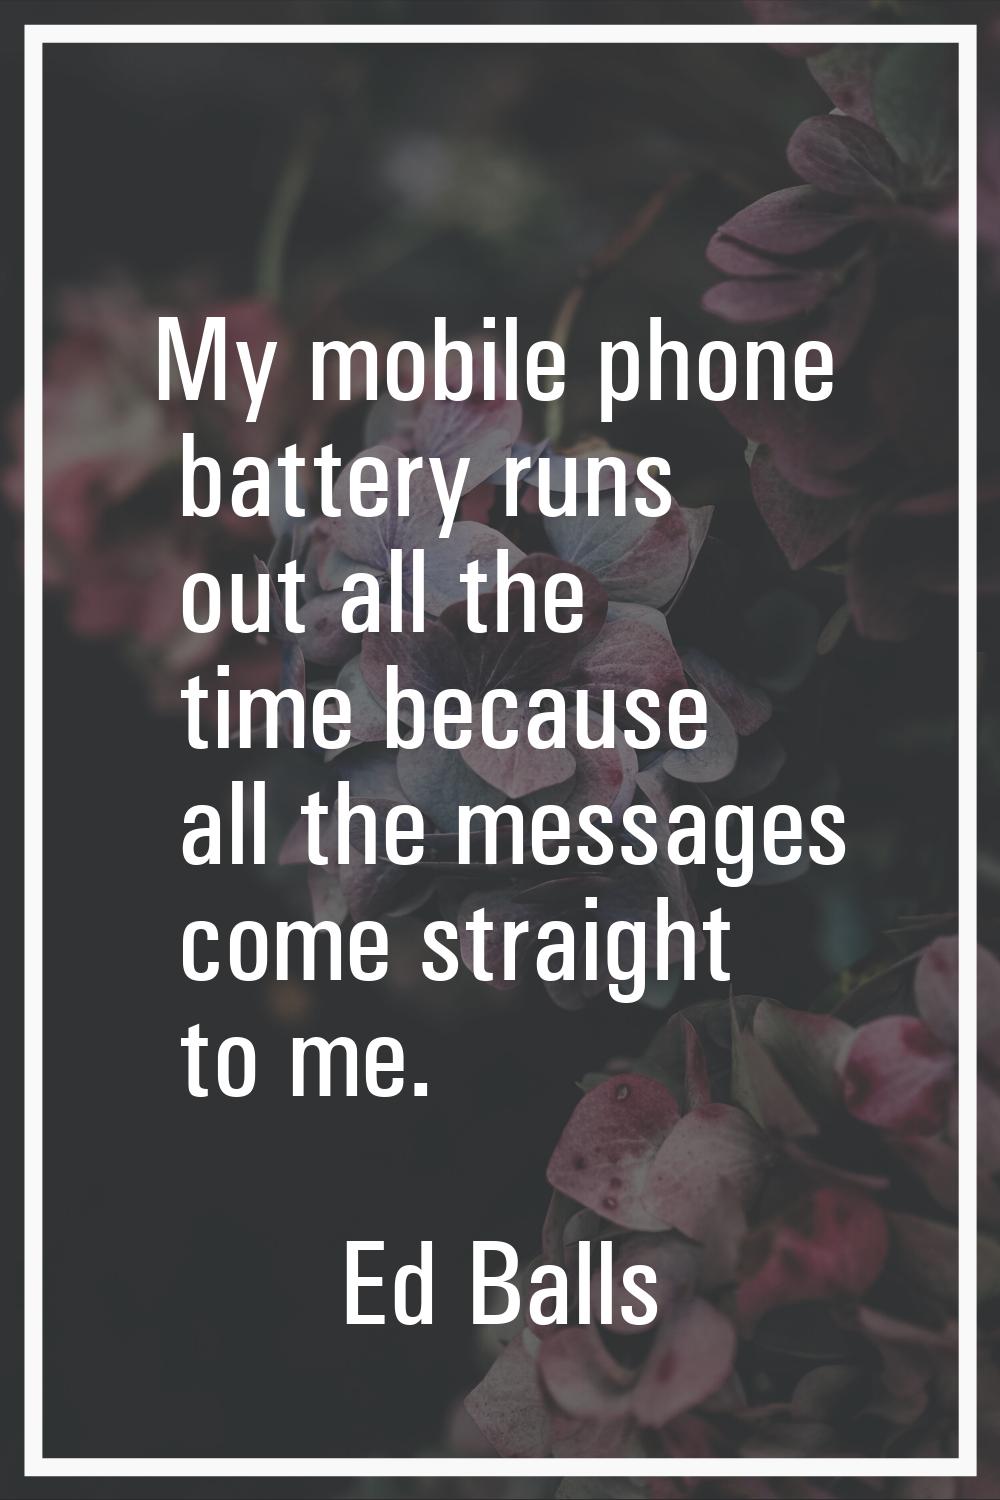 My mobile phone battery runs out all the time because all the messages come straight to me.